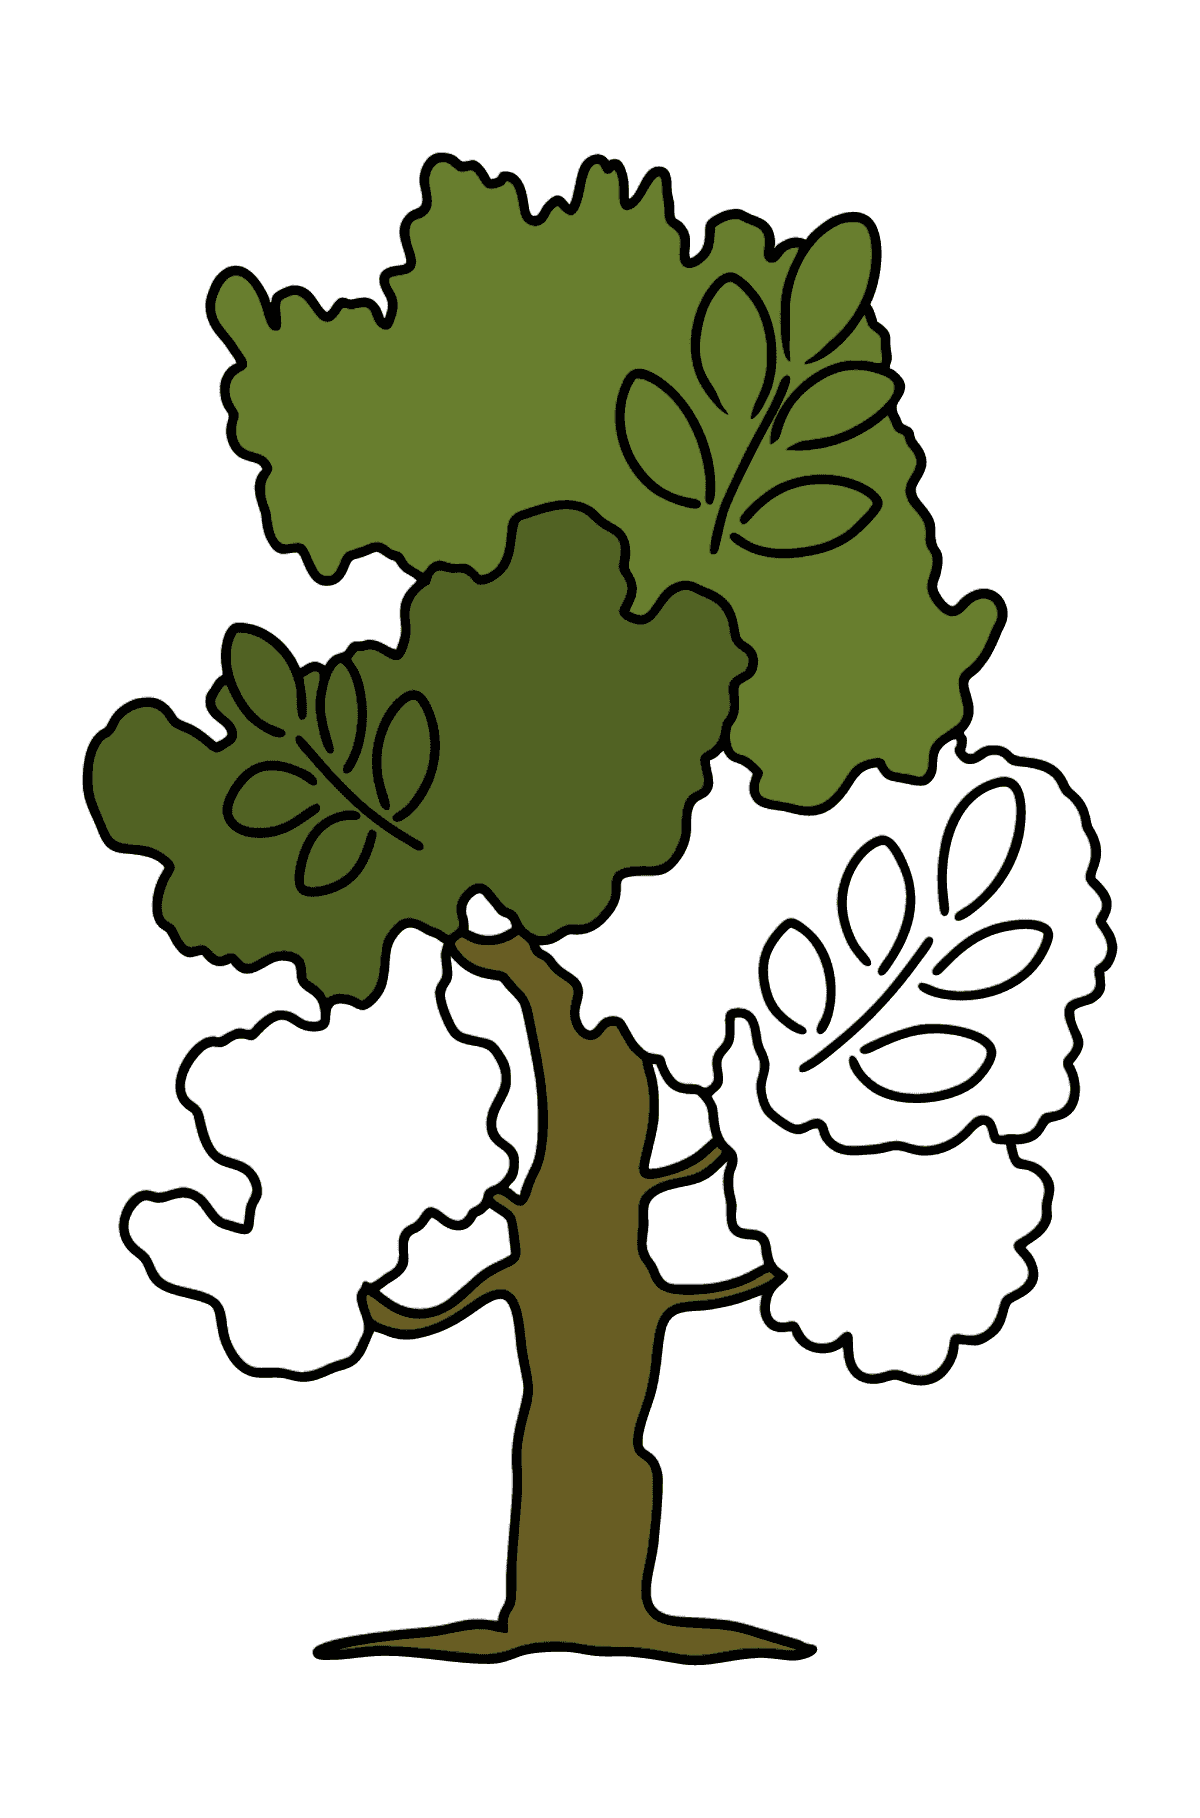 Ash Tree coloring page - Coloring Pages for Kids